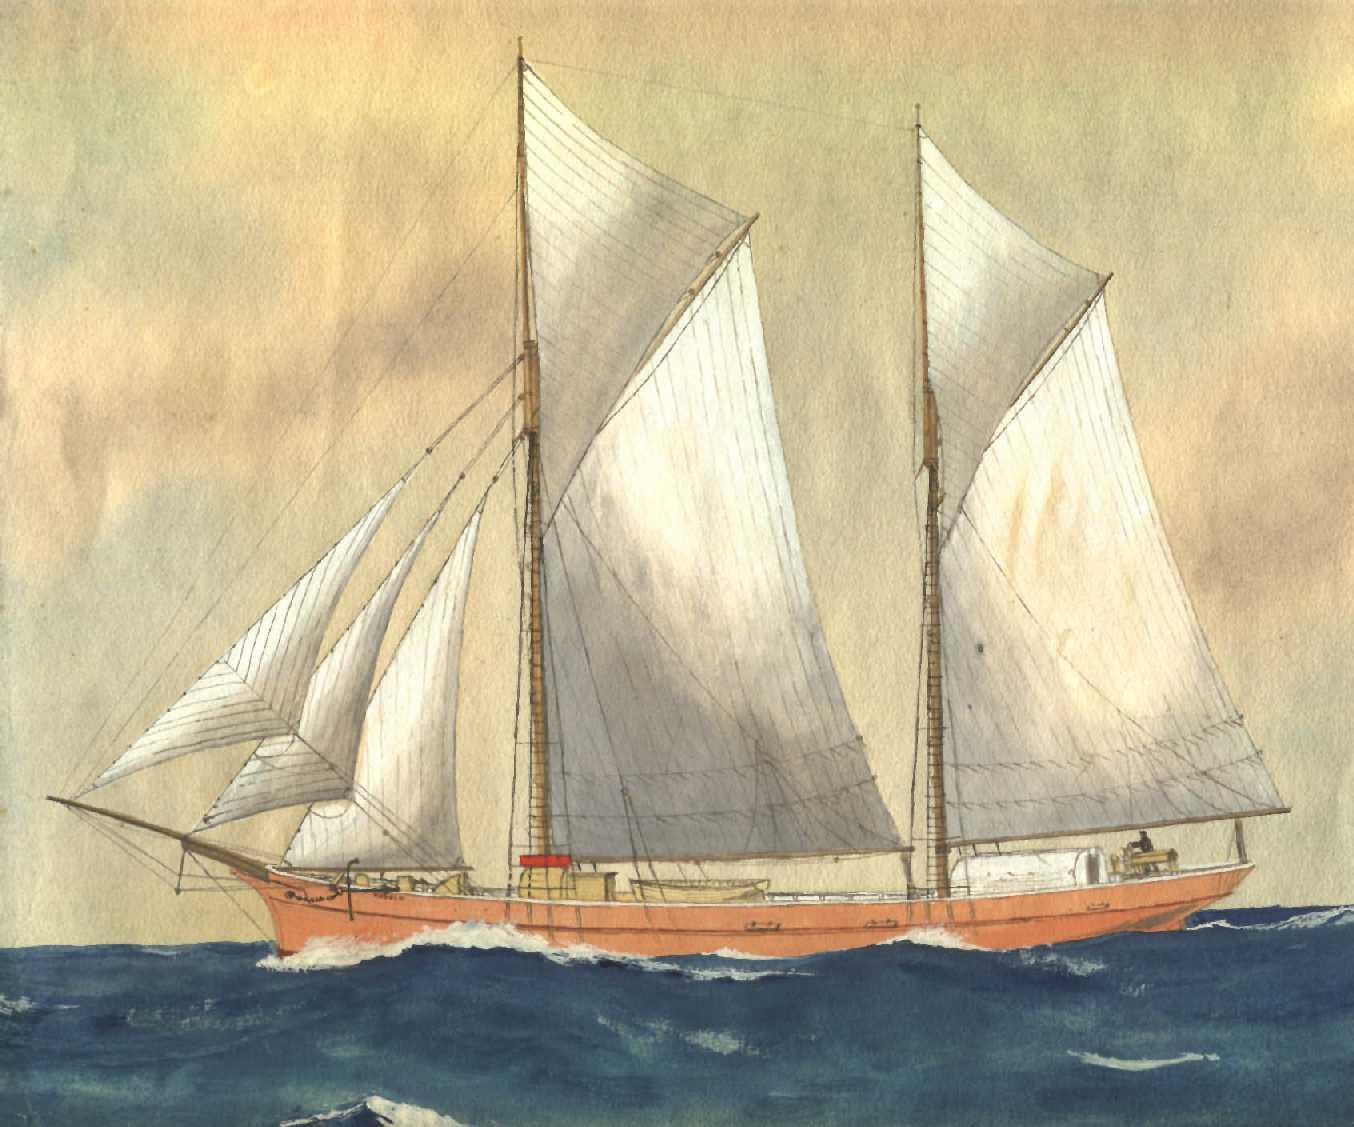 Wooden 2 masted Ketch, built in 1900 by Hans C Christensen, Bermagui, NSW.  An auxilliary motor was fitted in May 1922, making her have a bhp of 45 and a speed of 5.5 knots.  "Harold" was registered in Port Adelaide in September 1919 by A LeMessurier & Pa